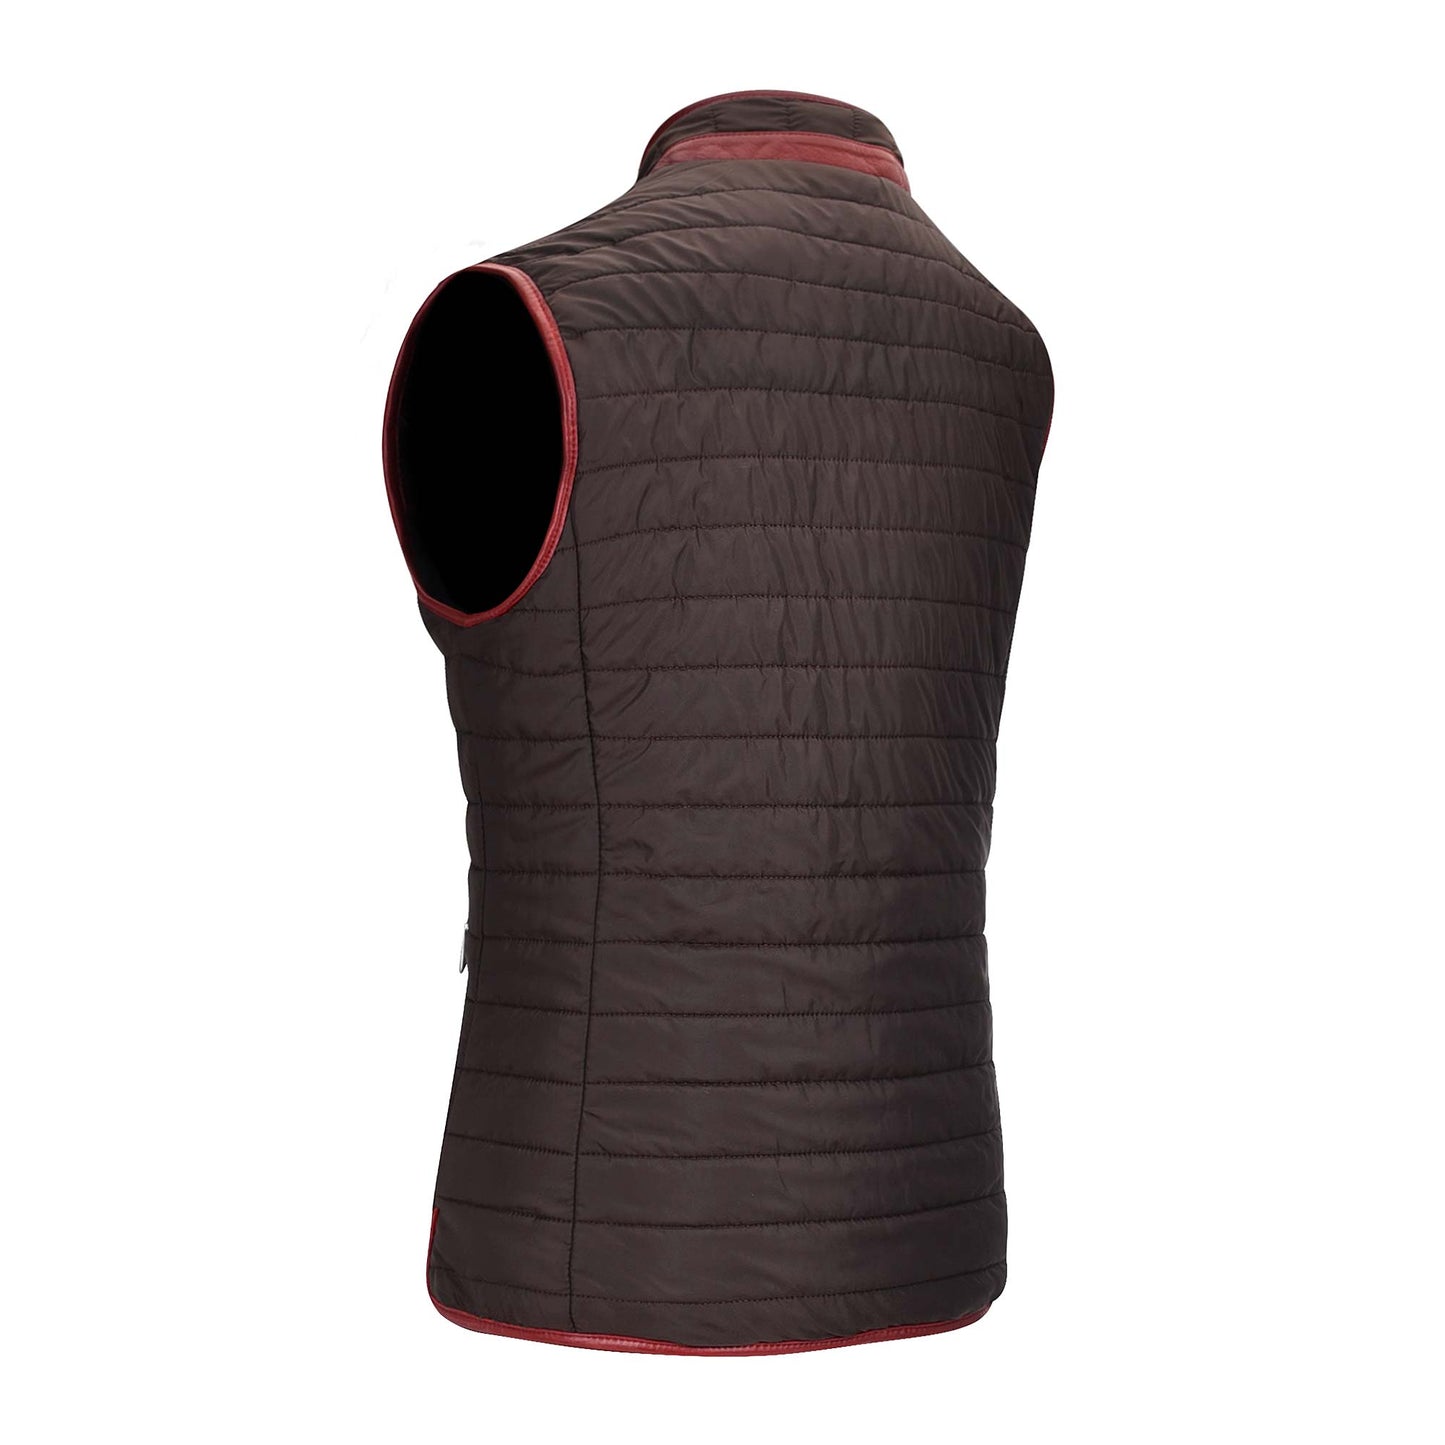 Reversivle warm padded fabric with touches of red 